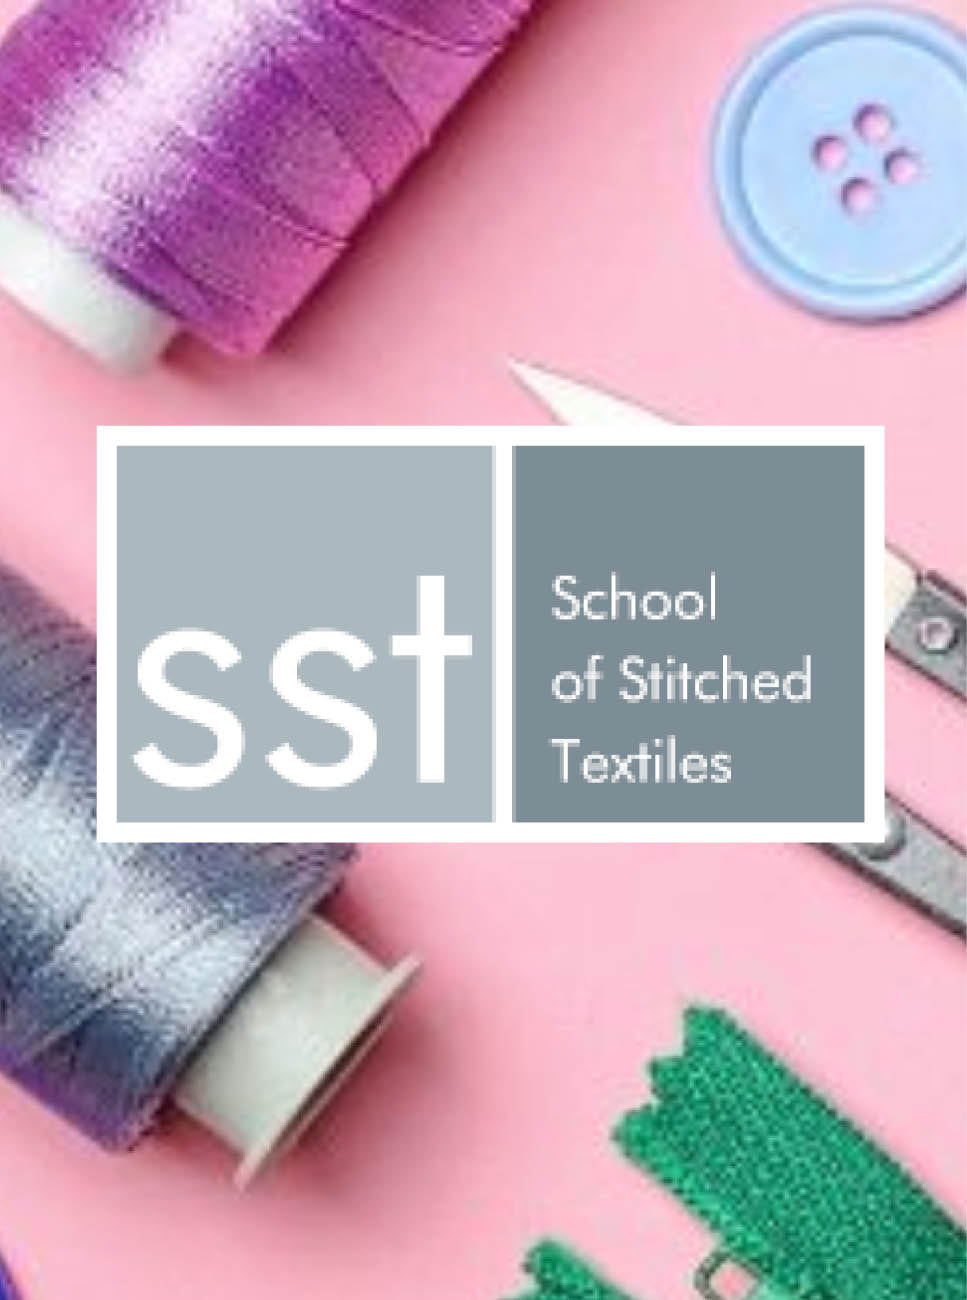 School of Stitched Textiles hand embroidery